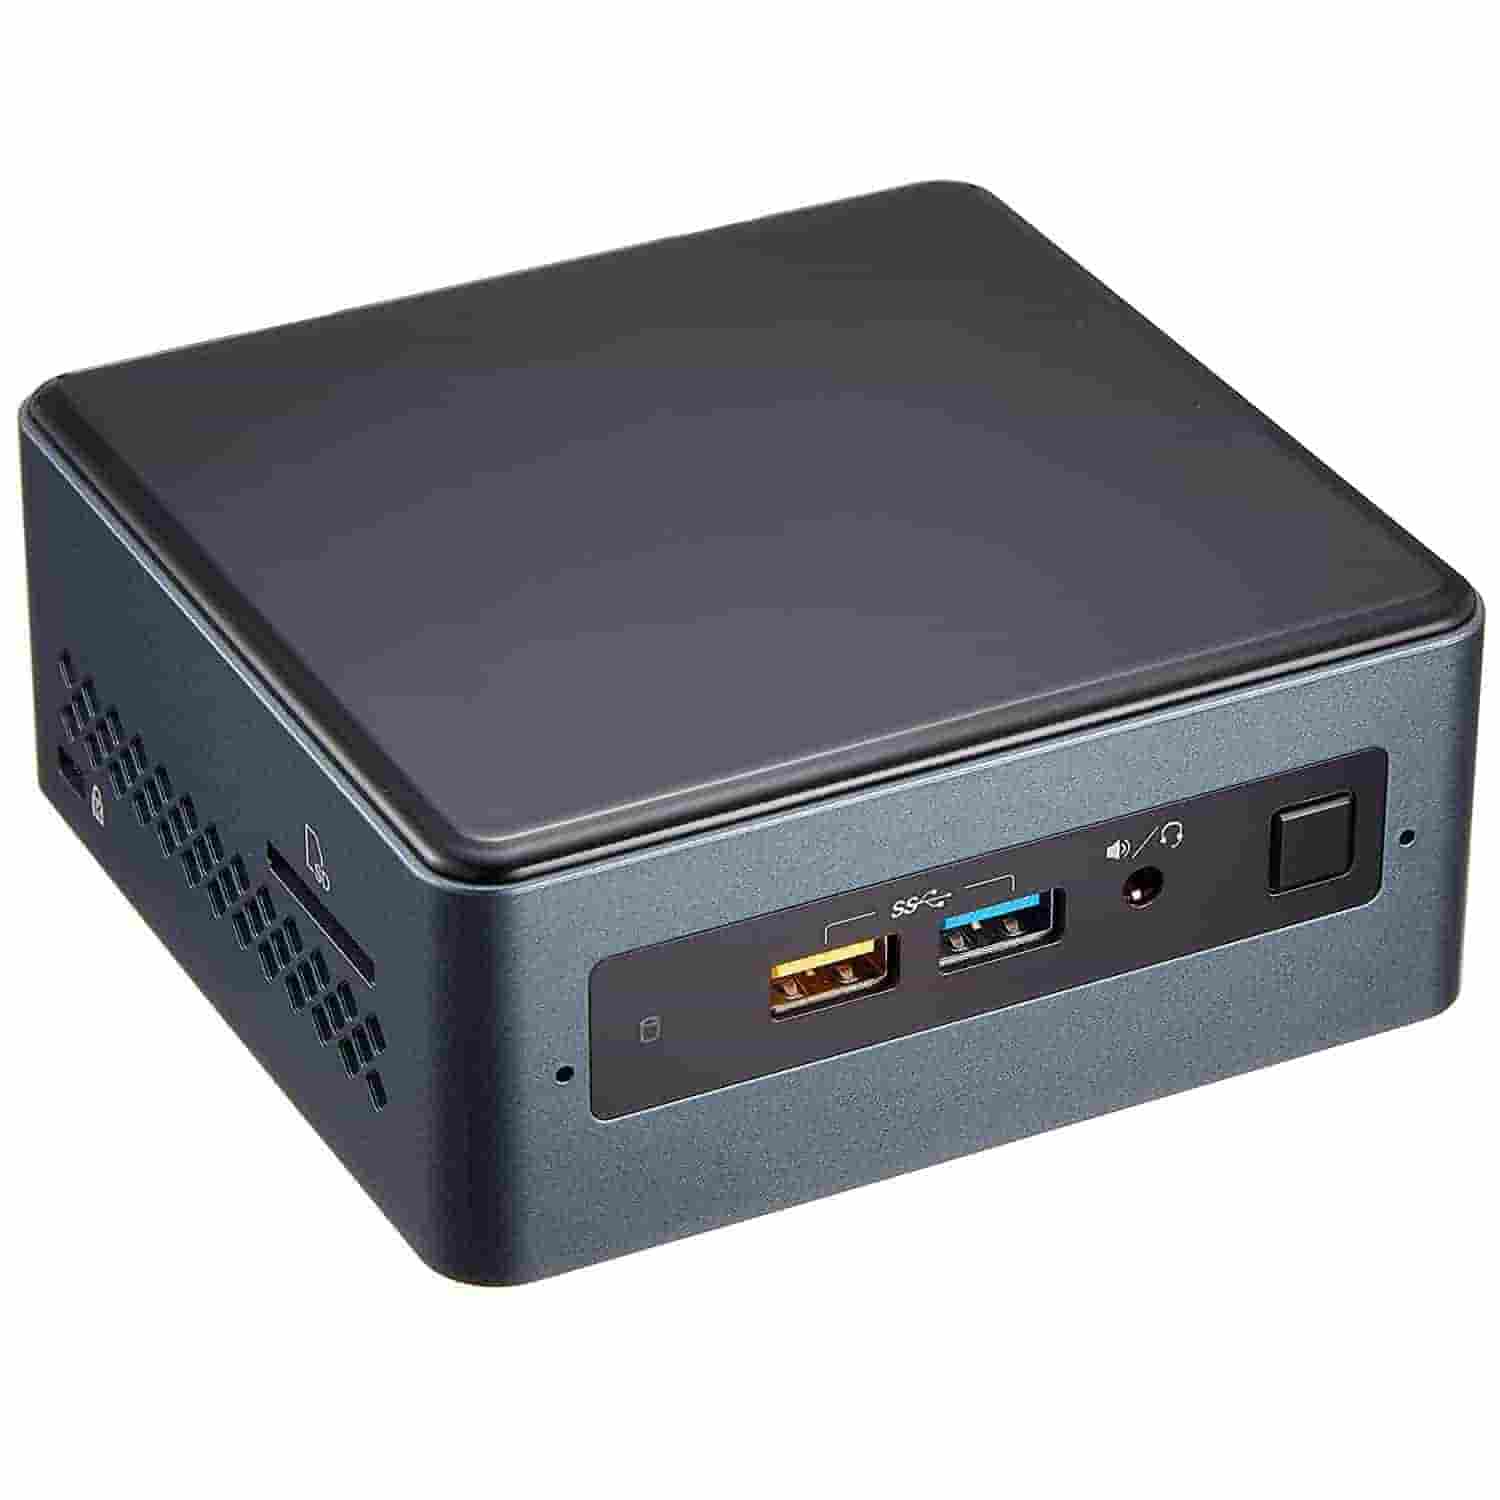 Everything you need to know about buying an Intel NUC PC